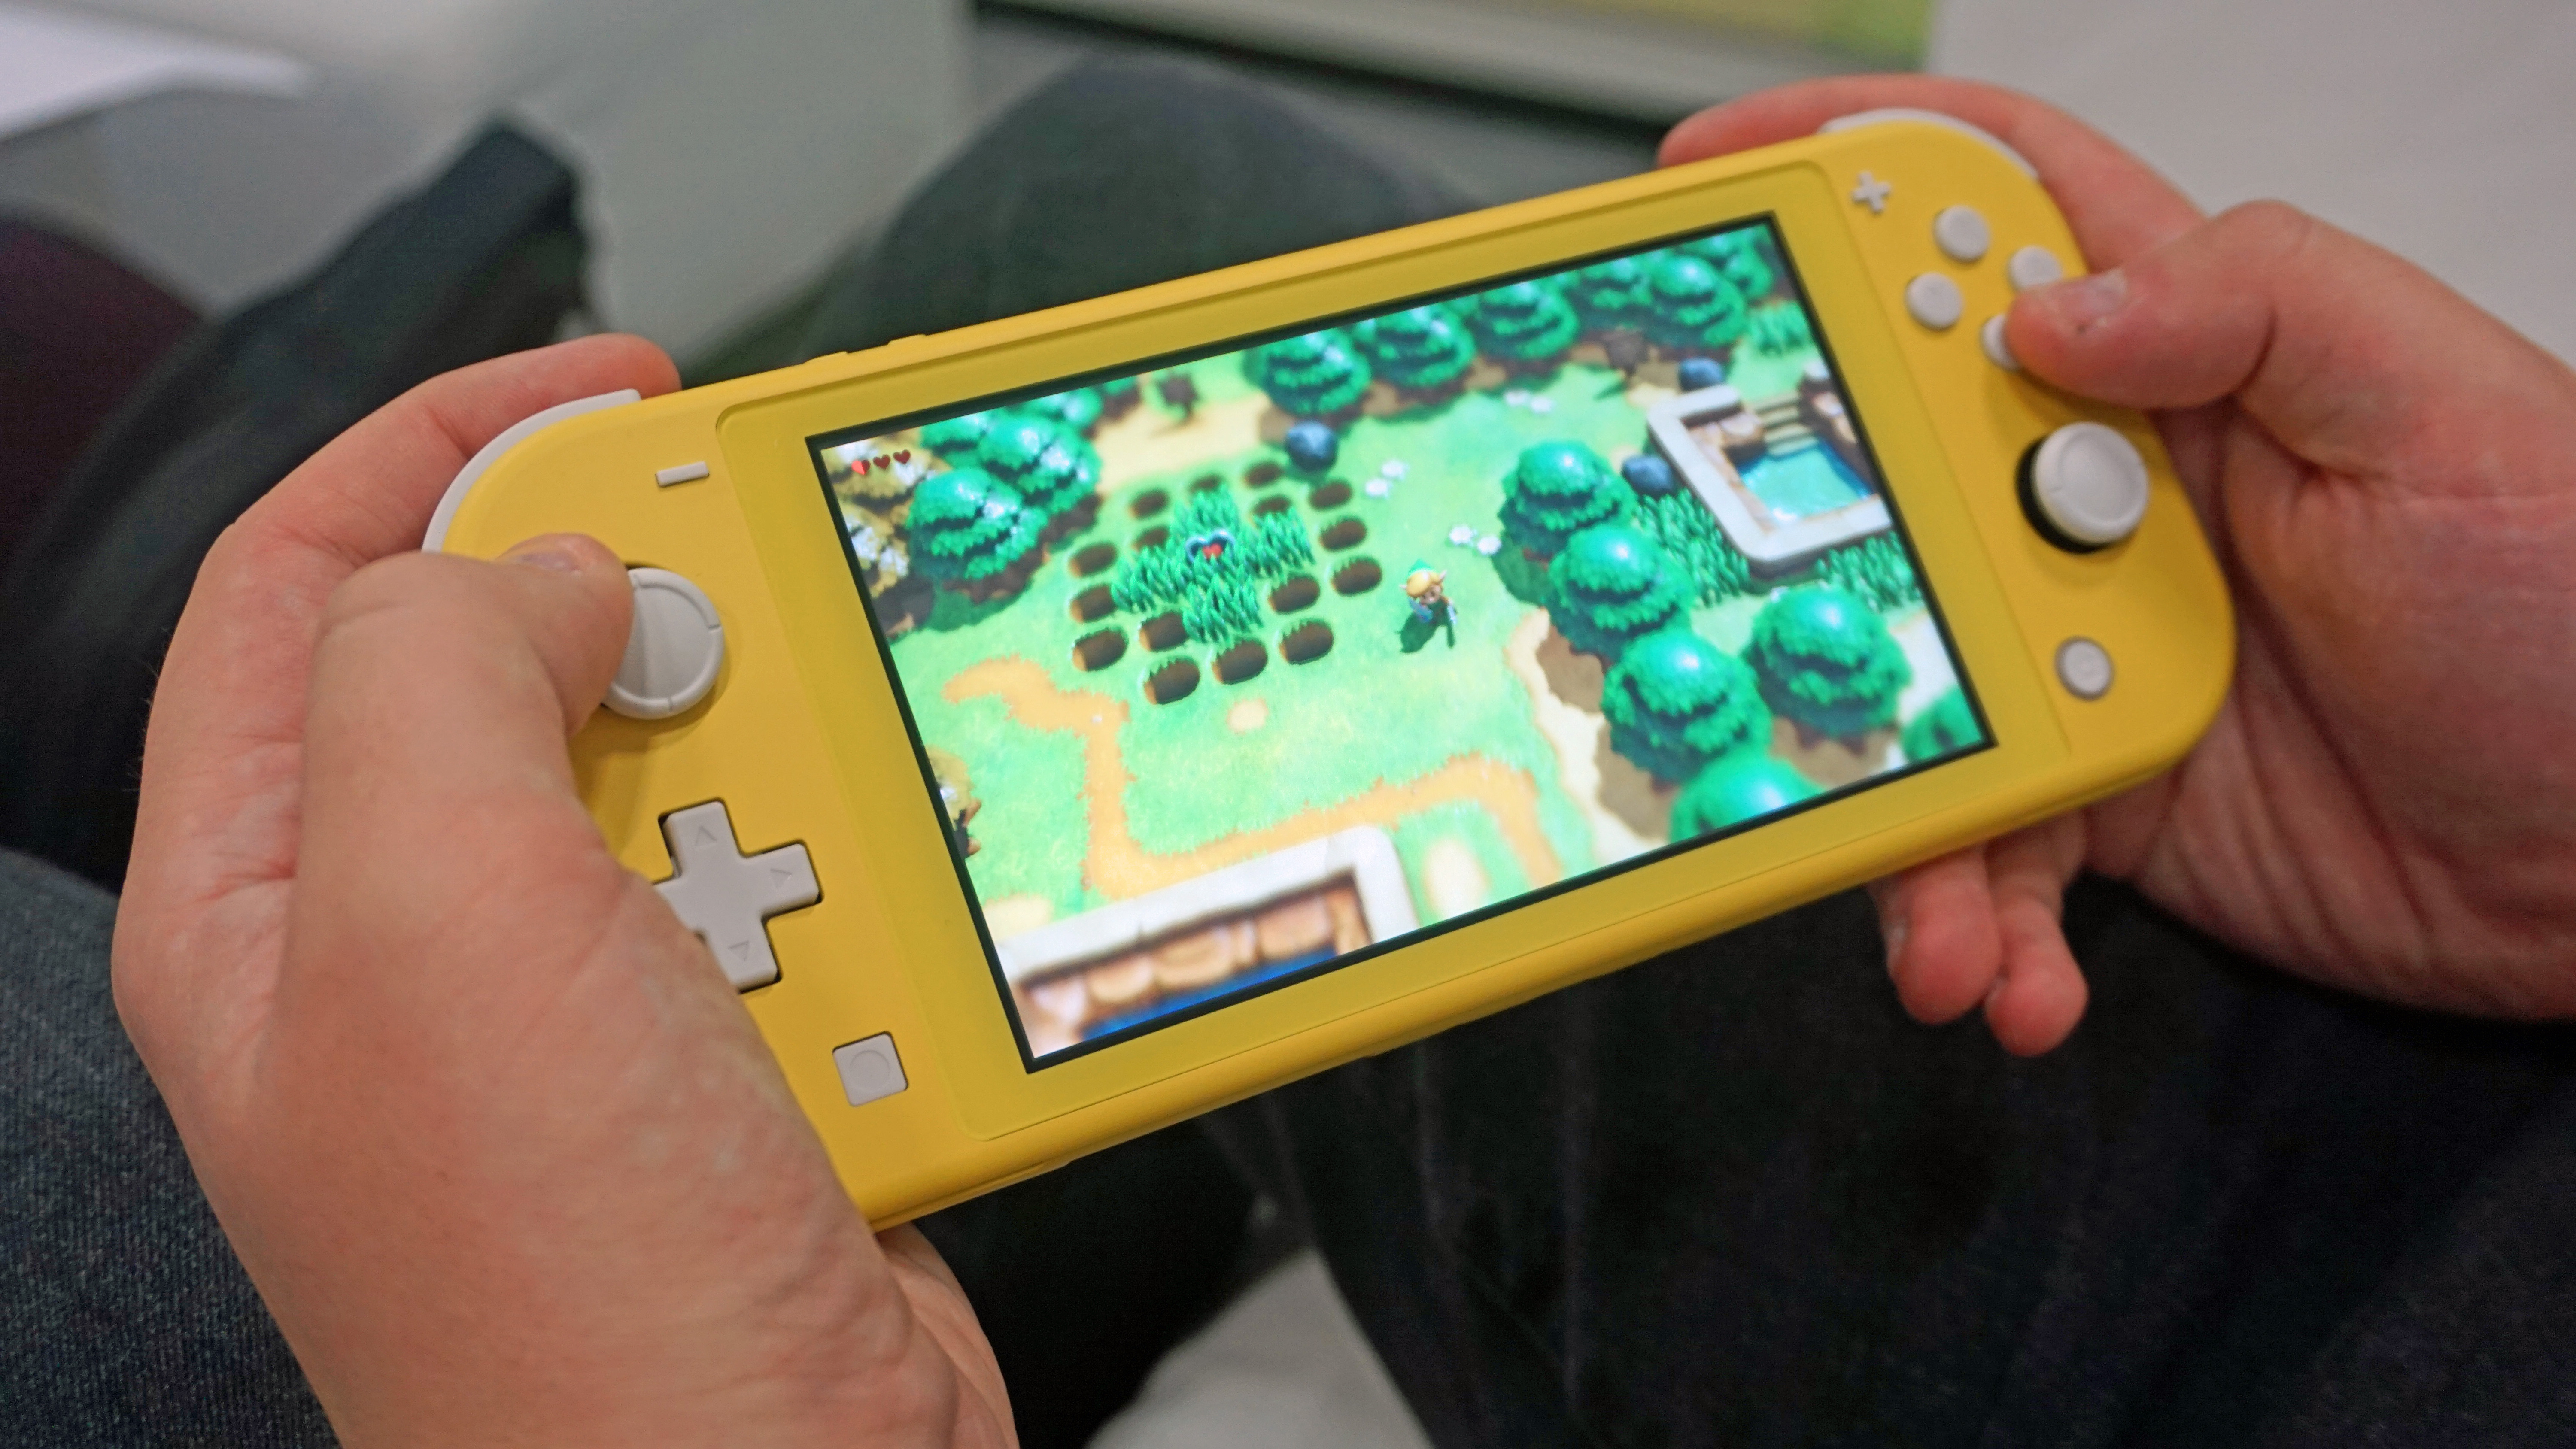 The Nintendo Switch Lite cannot output to a TV even with hacks and